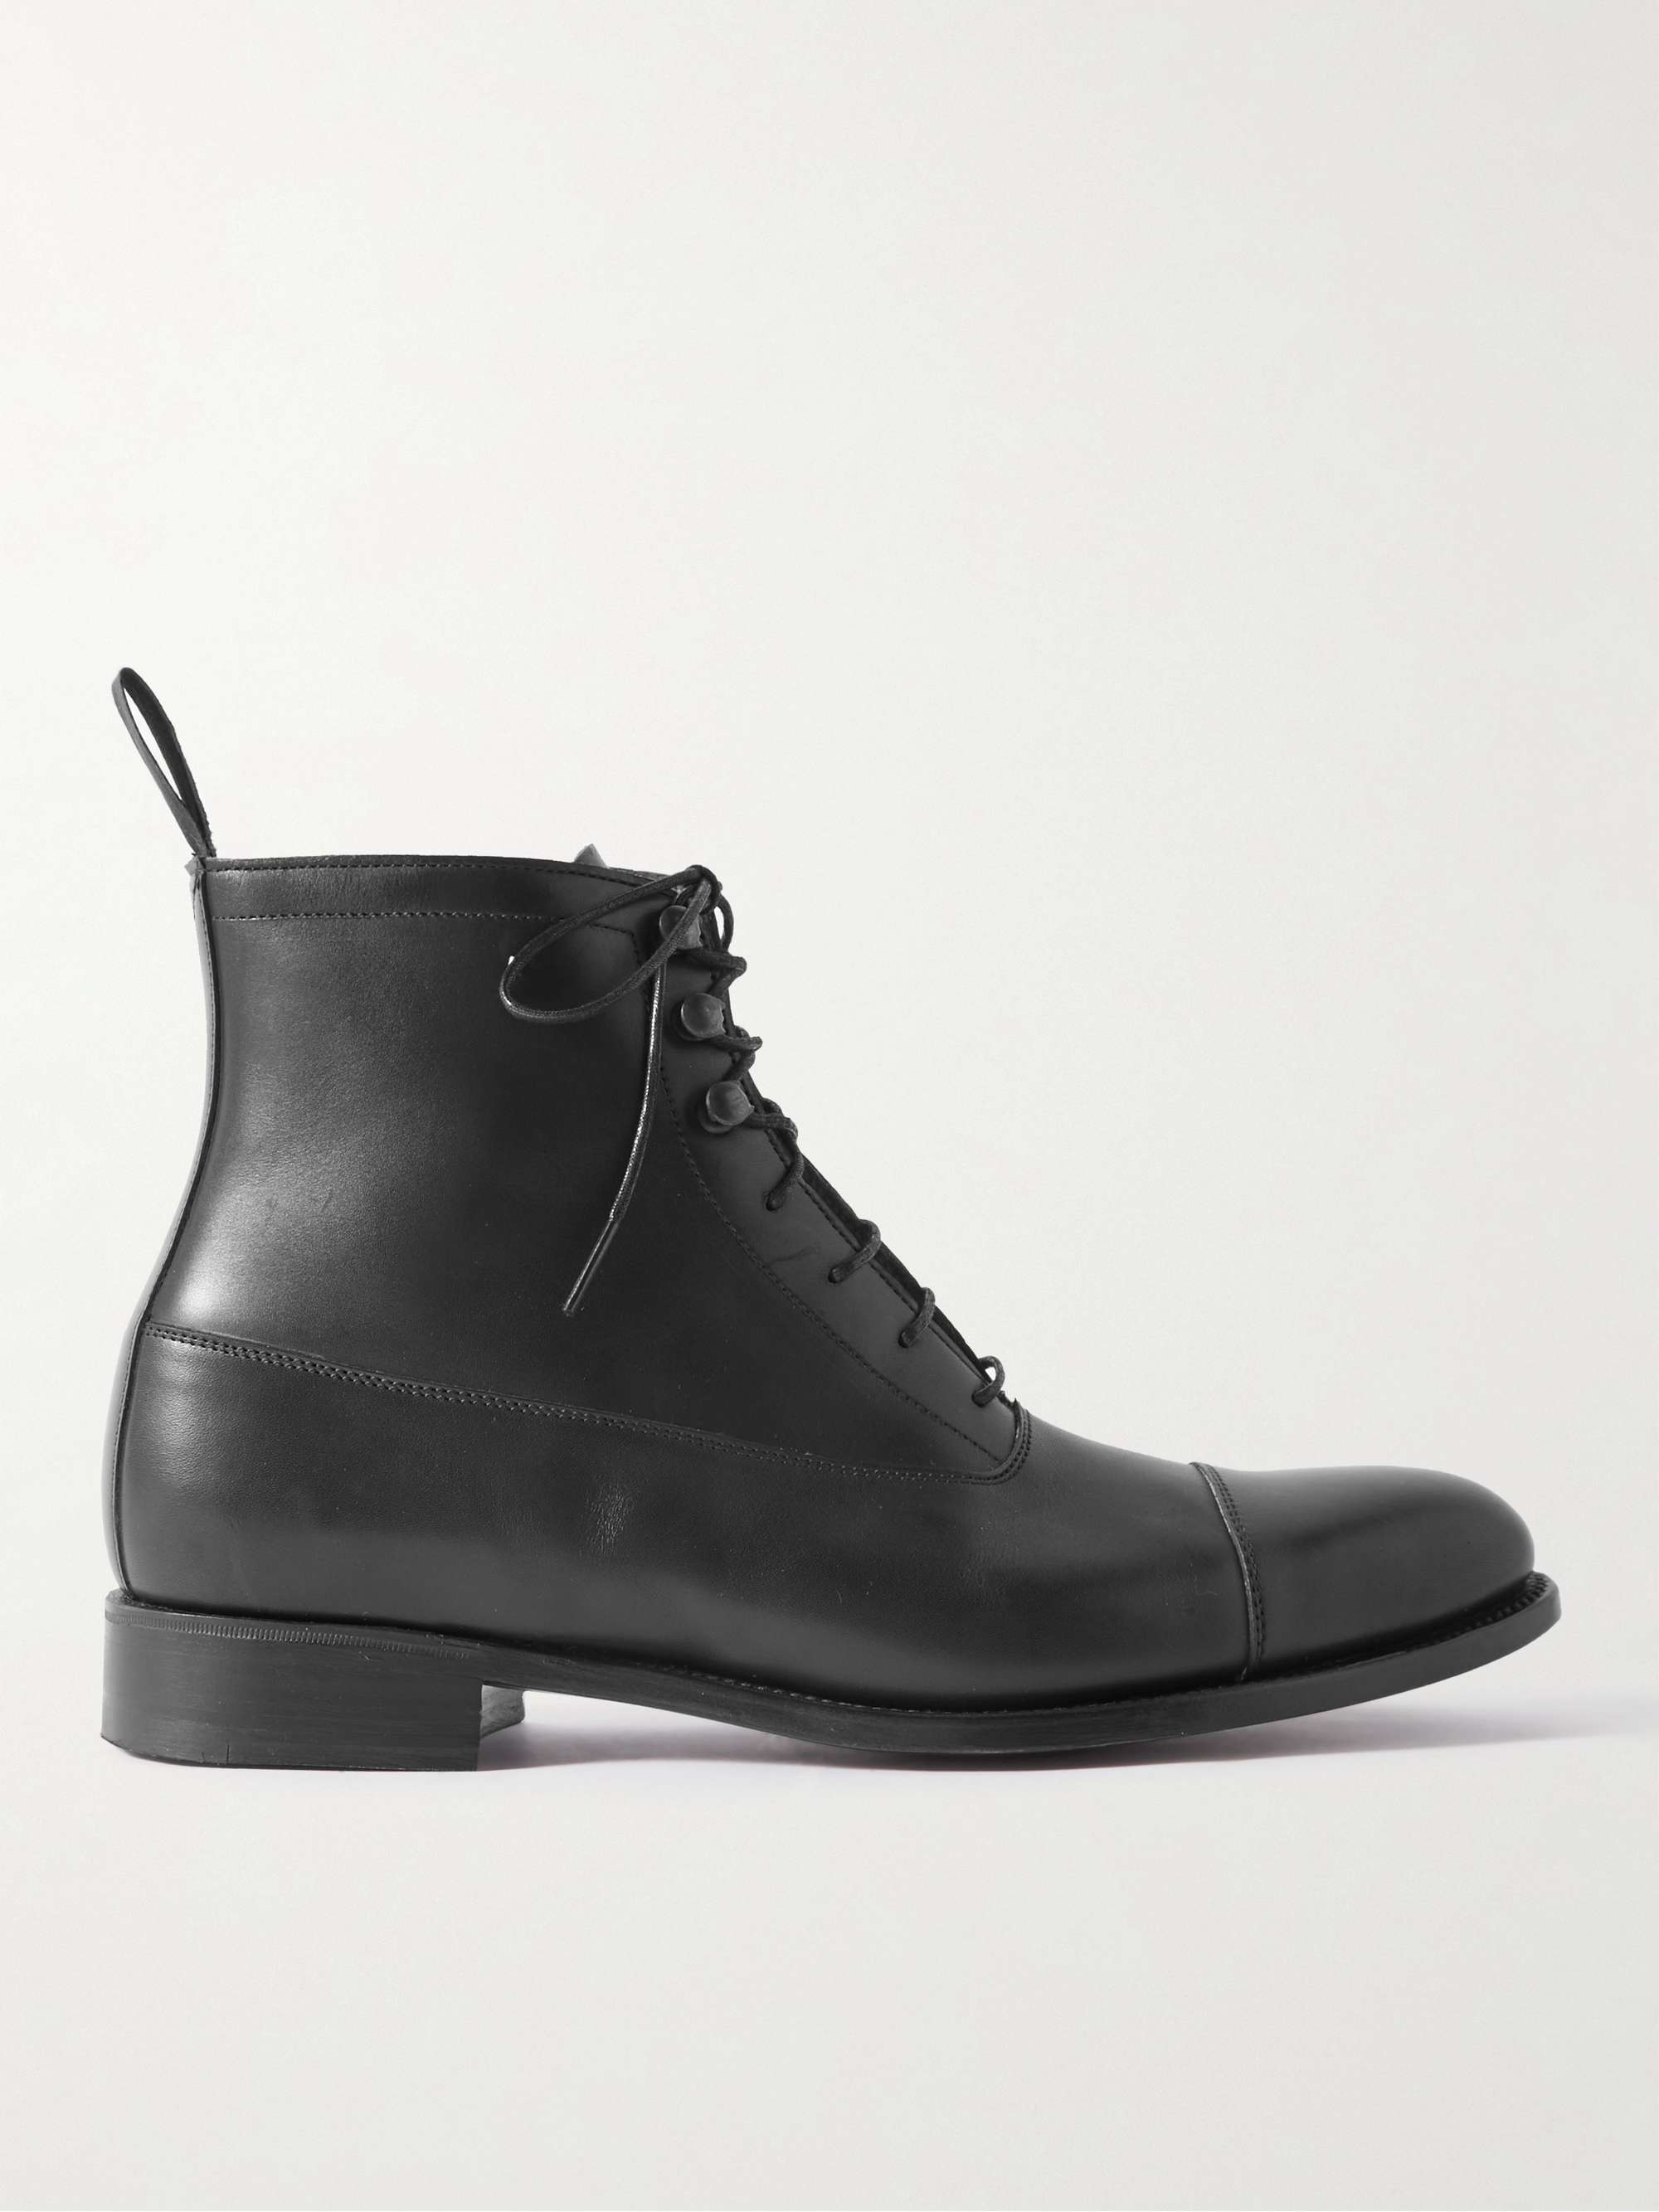 GEORGE CLEVERLEY Balmoral Leather Lace-Up Boots